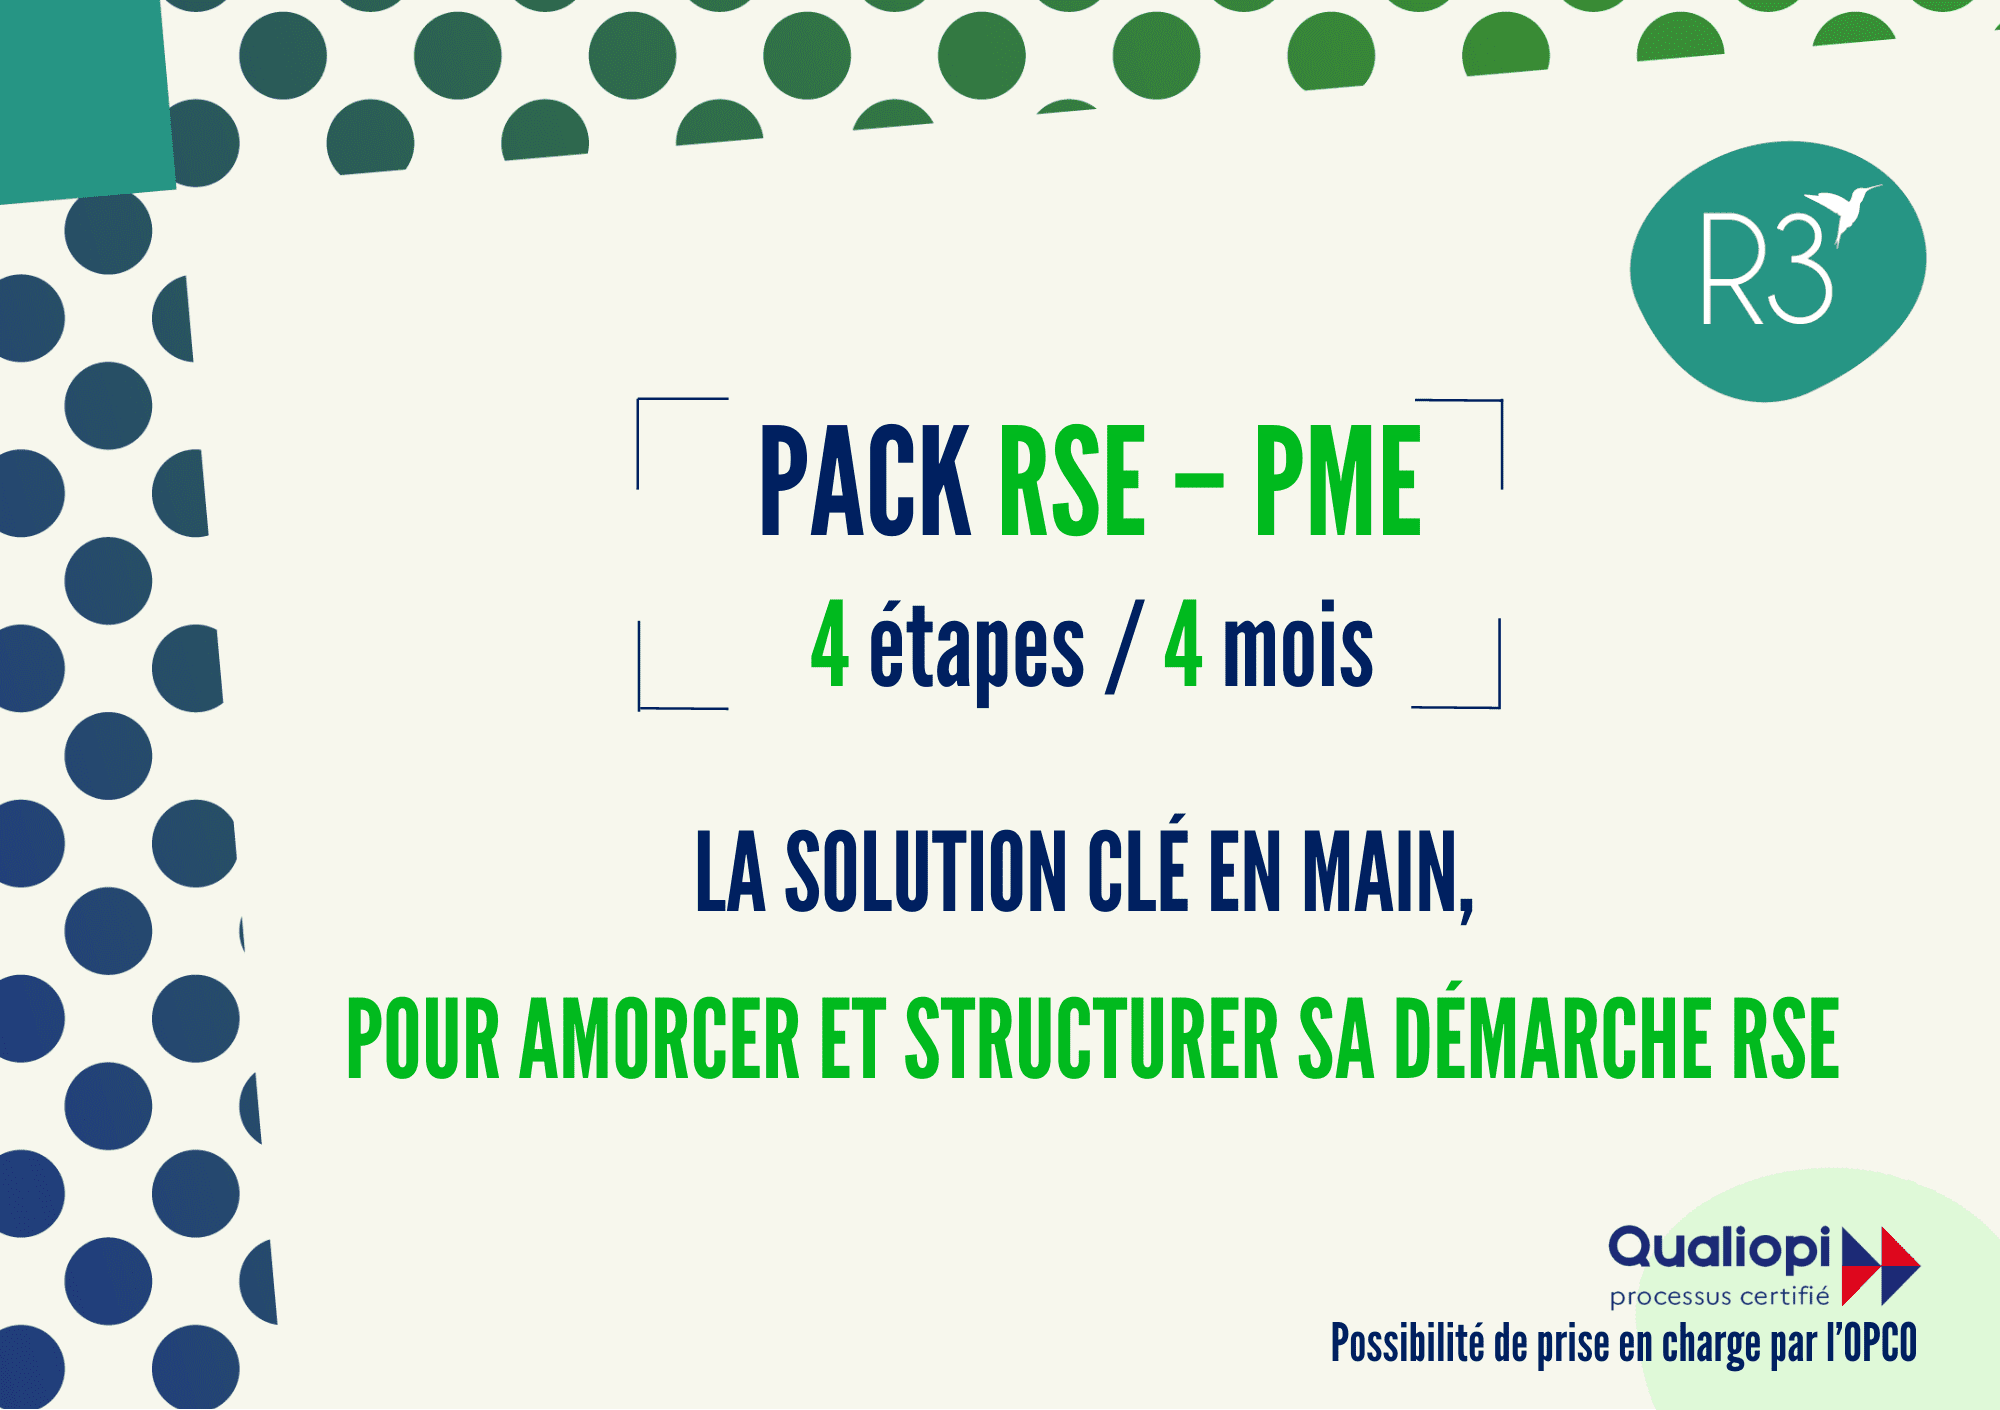 image ressource : Pack RSE-PME